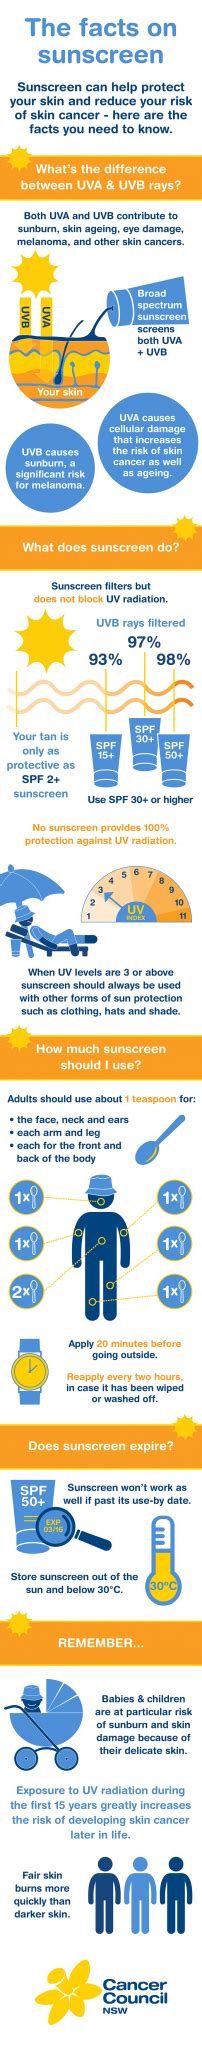 the facts on sunscreen cancer council nsw